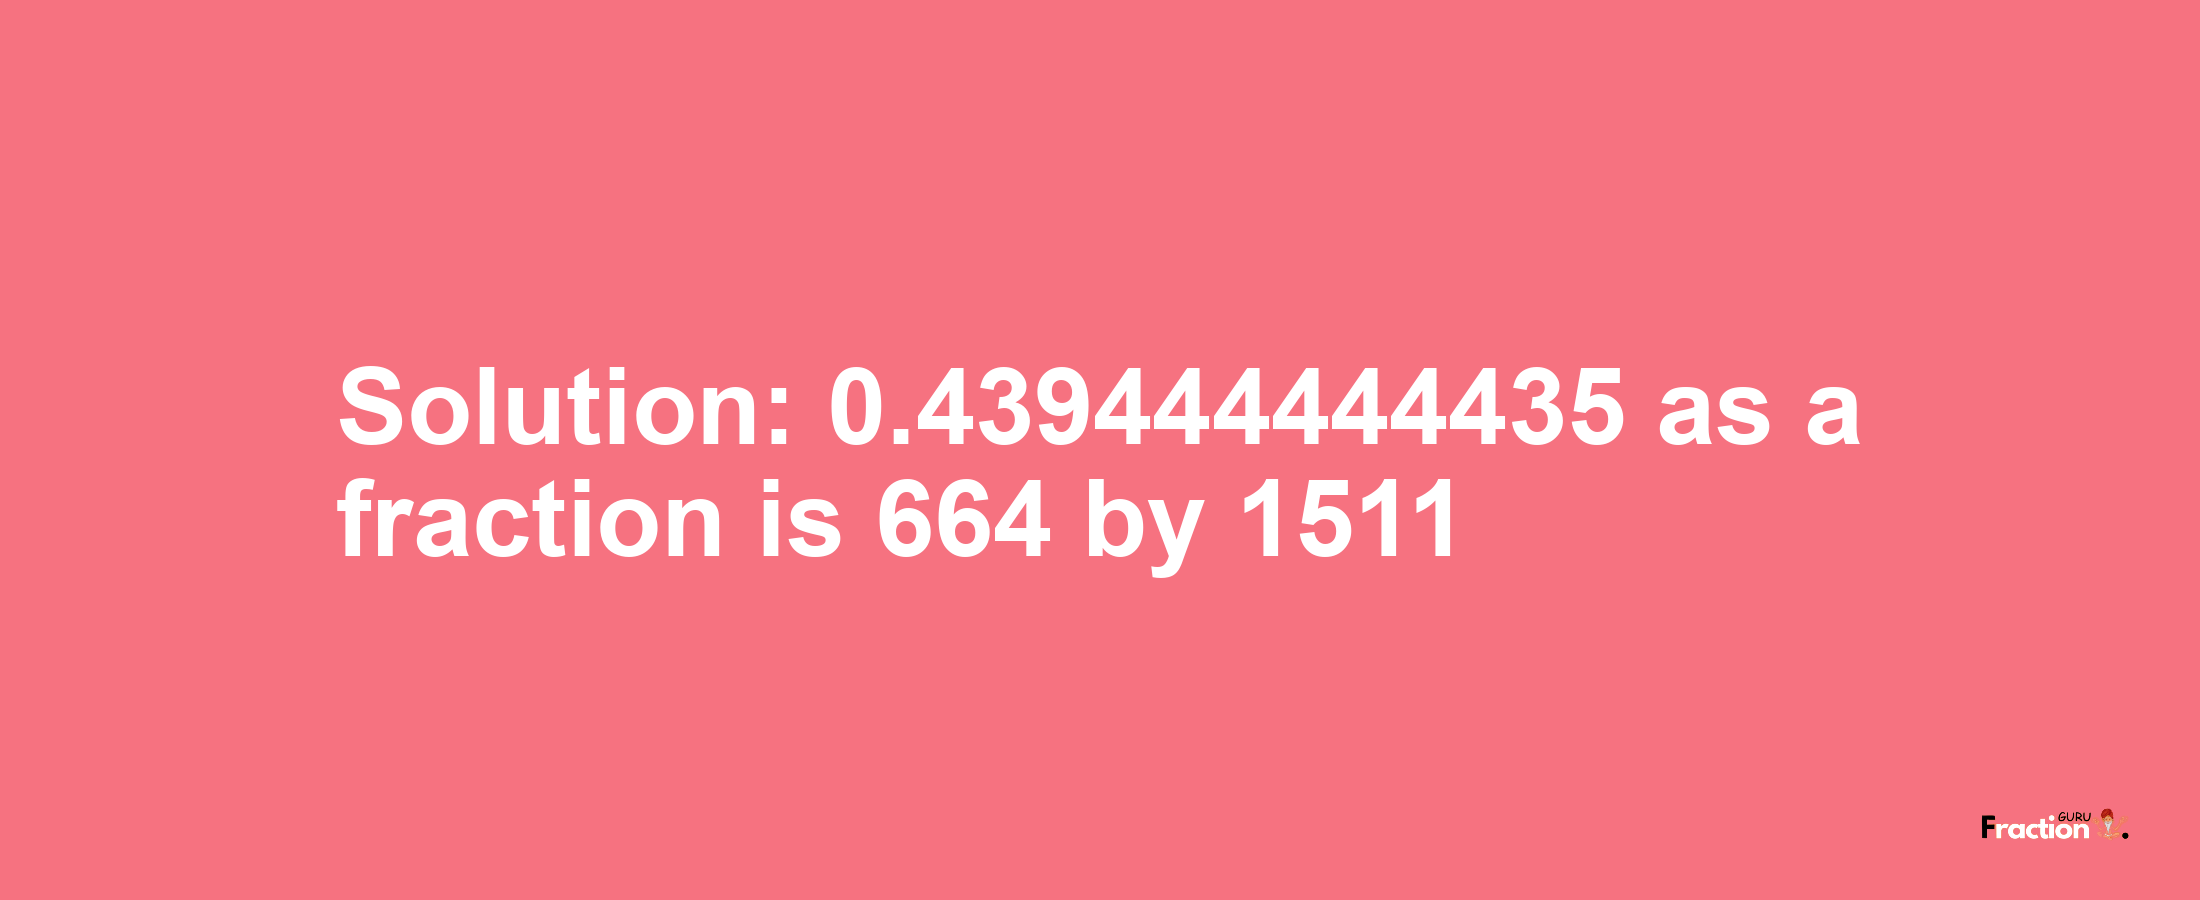 Solution:0.439444444435 as a fraction is 664/1511